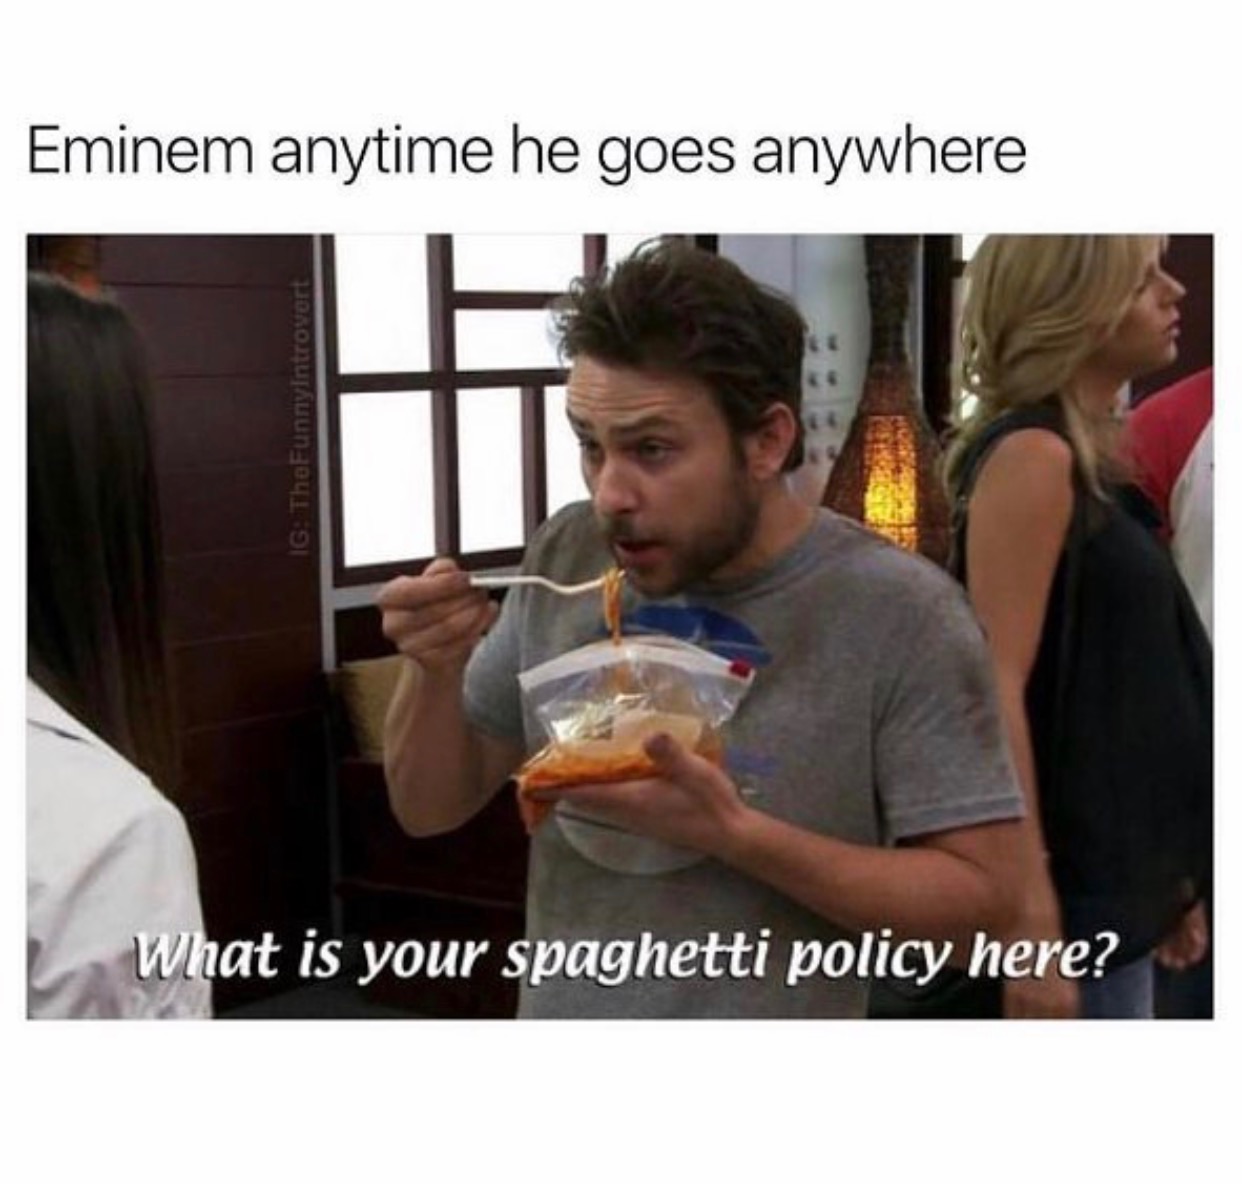 memes - whats your spaghetti policy here - Eminem anytime he goes anywhere Ig ThaFunnyIntrovert La What is your spaghetti policy here?